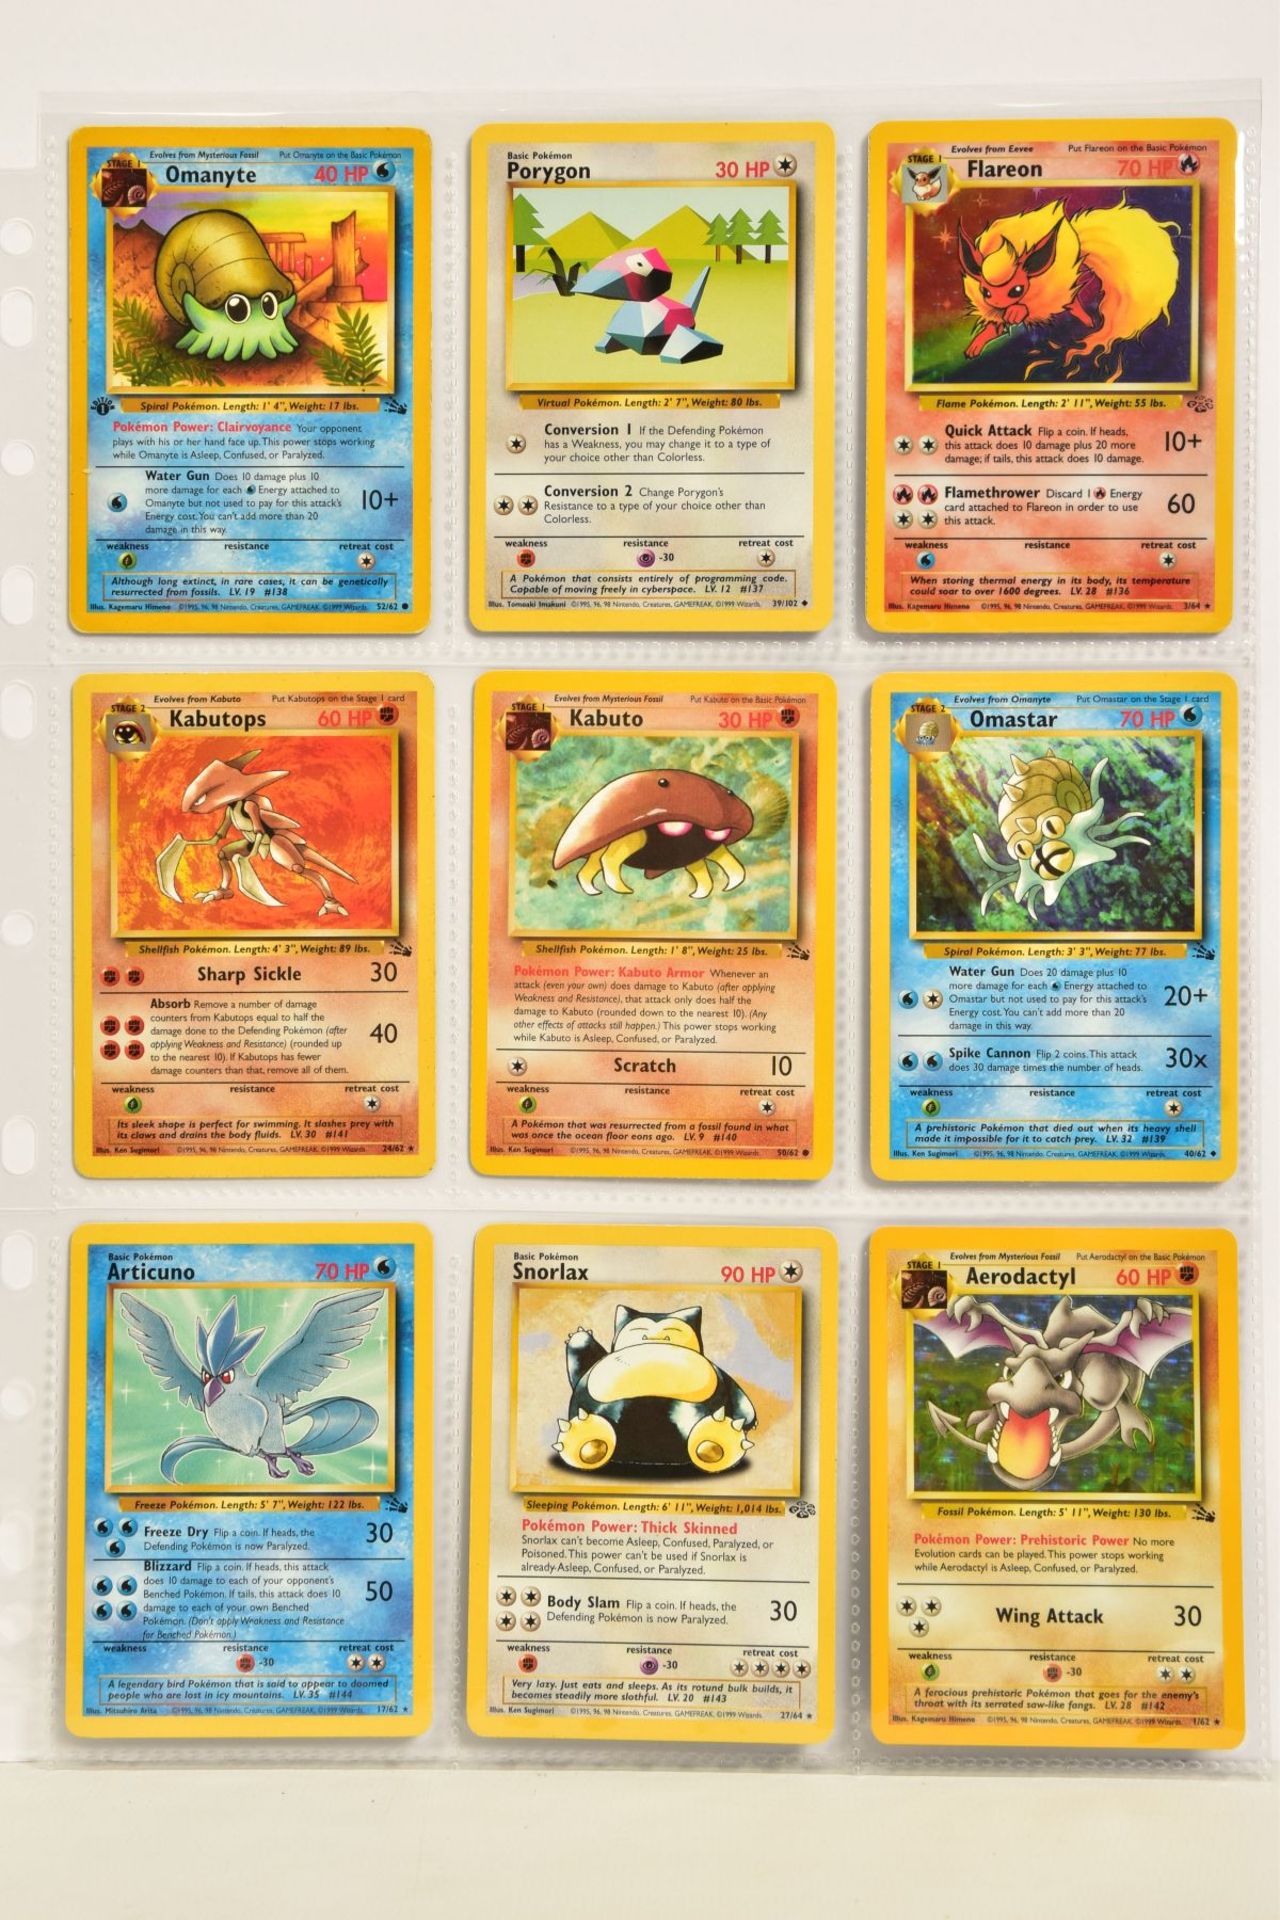 POKEMON THE TRADING CARD GAME 154 CARDS IN POKEMON TCG FOLDER, includes one of each of the - Image 17 of 20